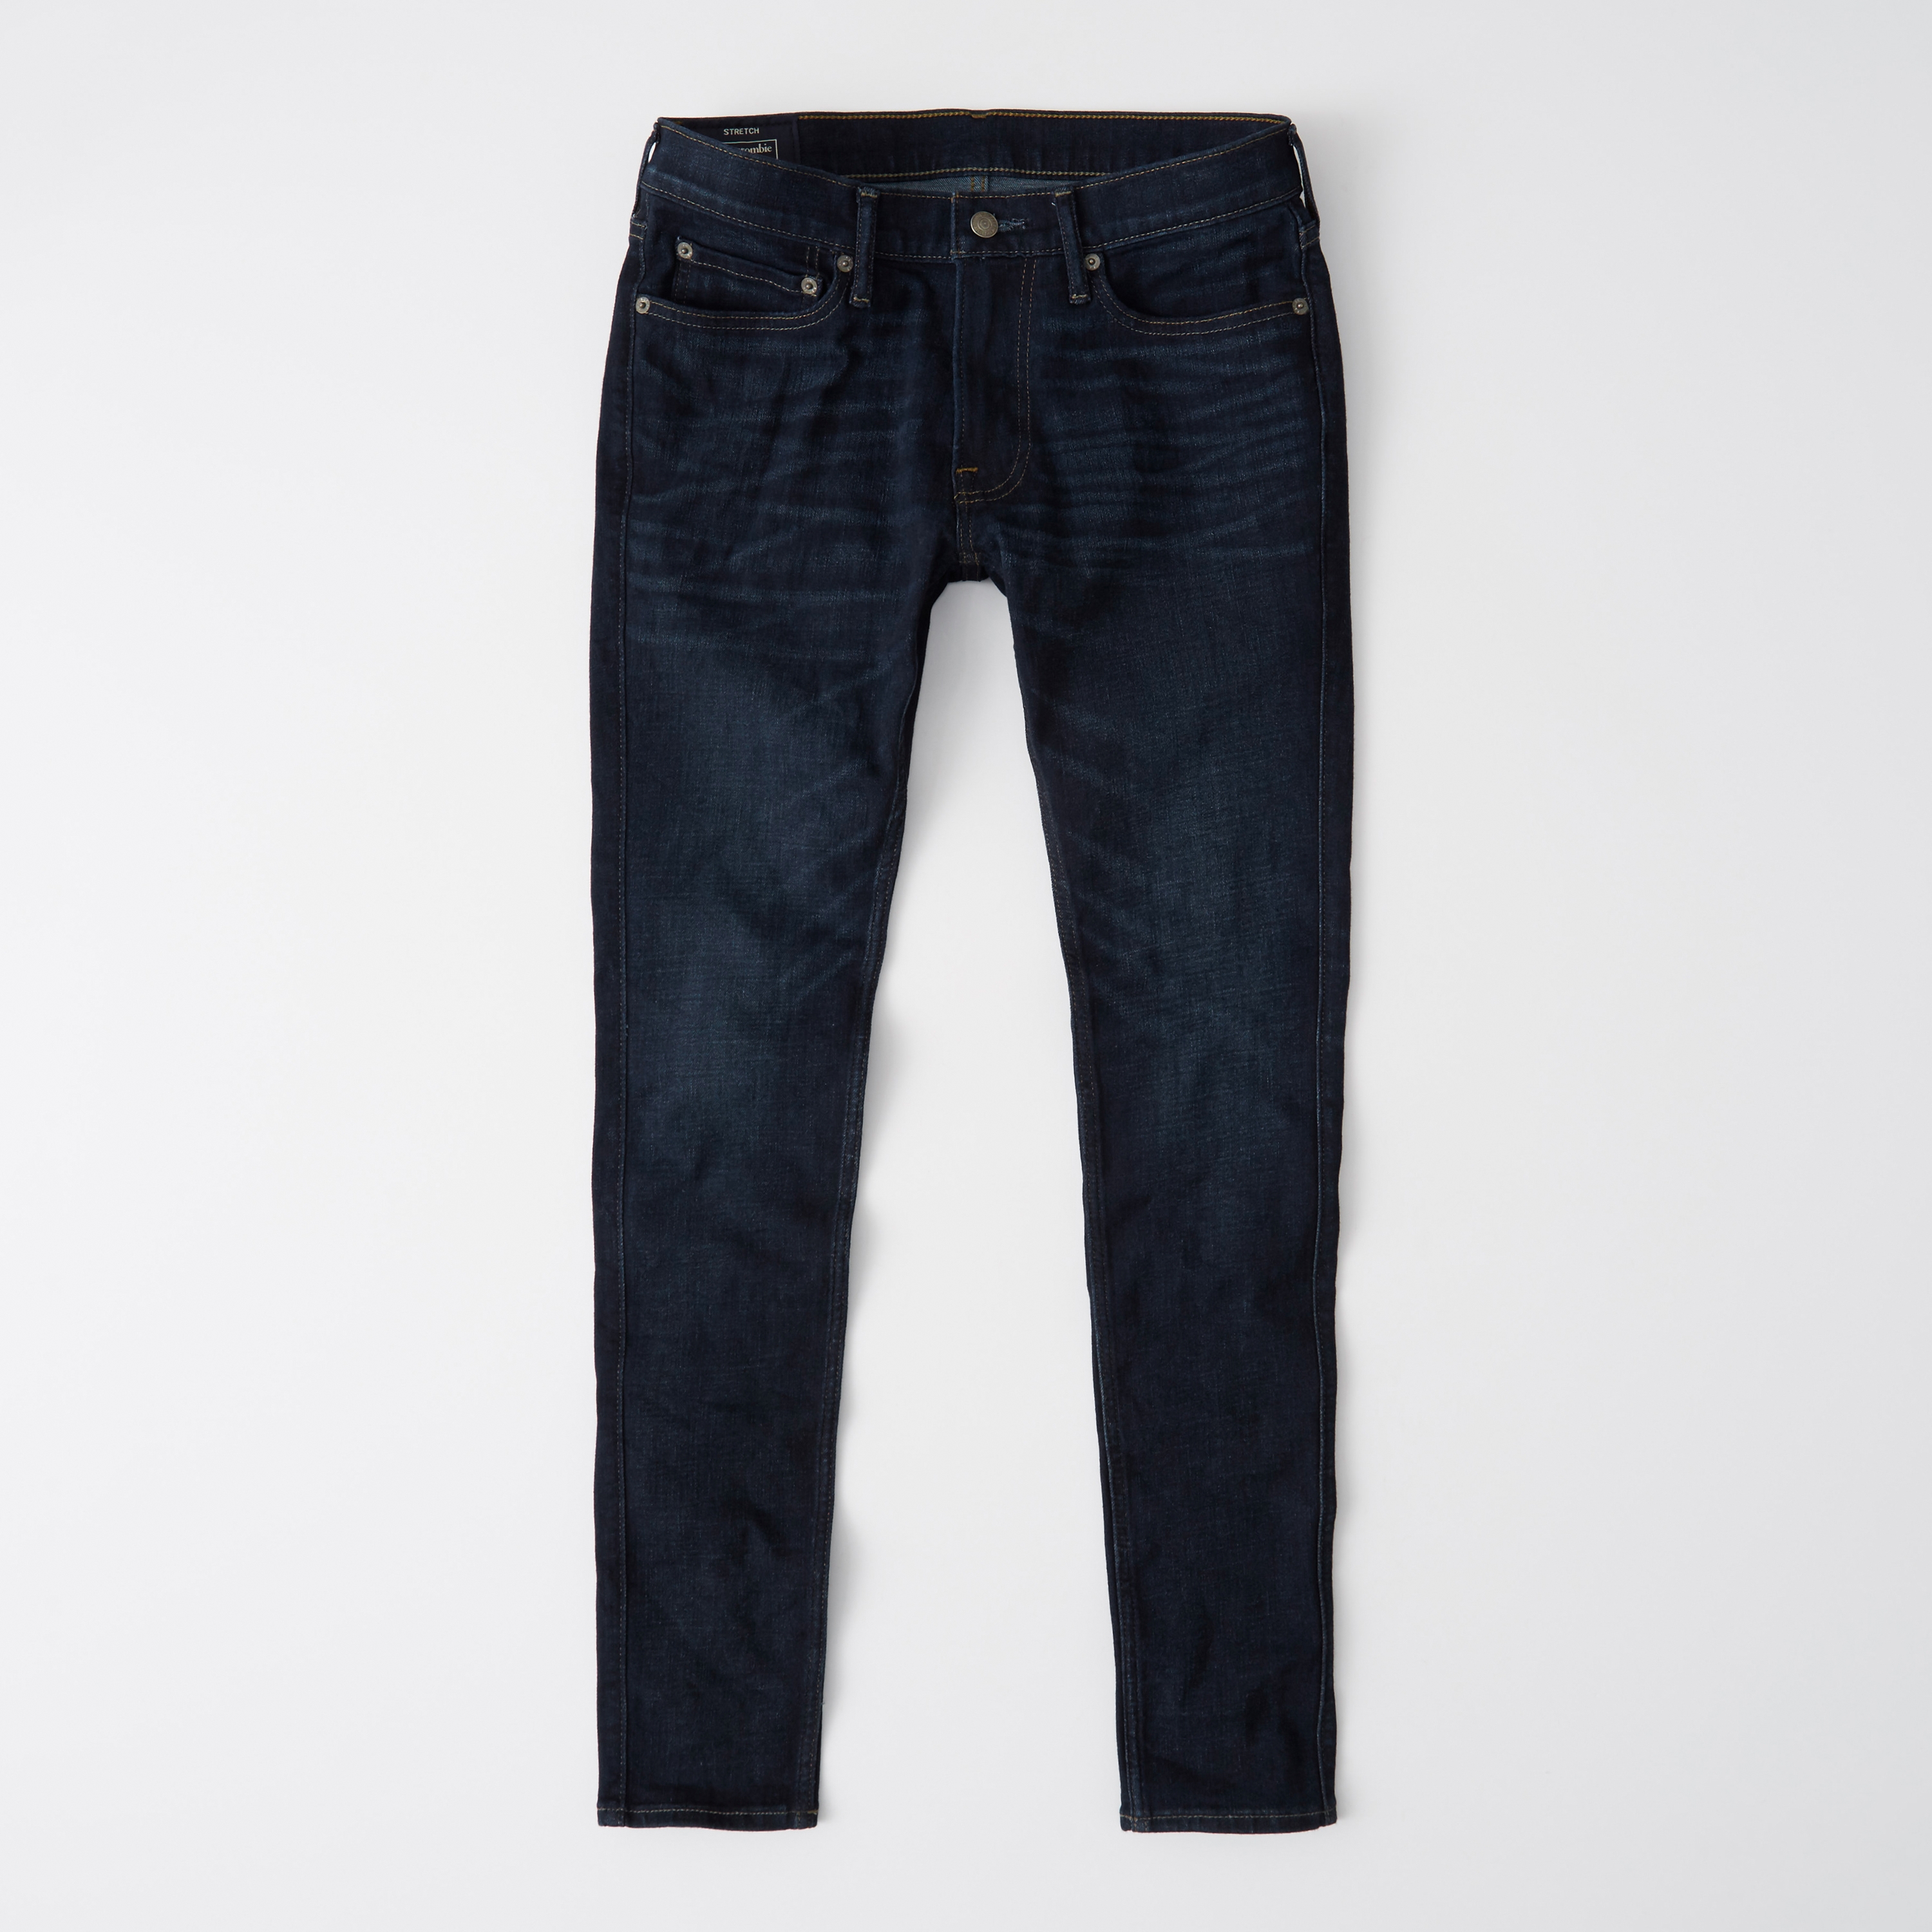 abercrombie & fitch extreme skinny